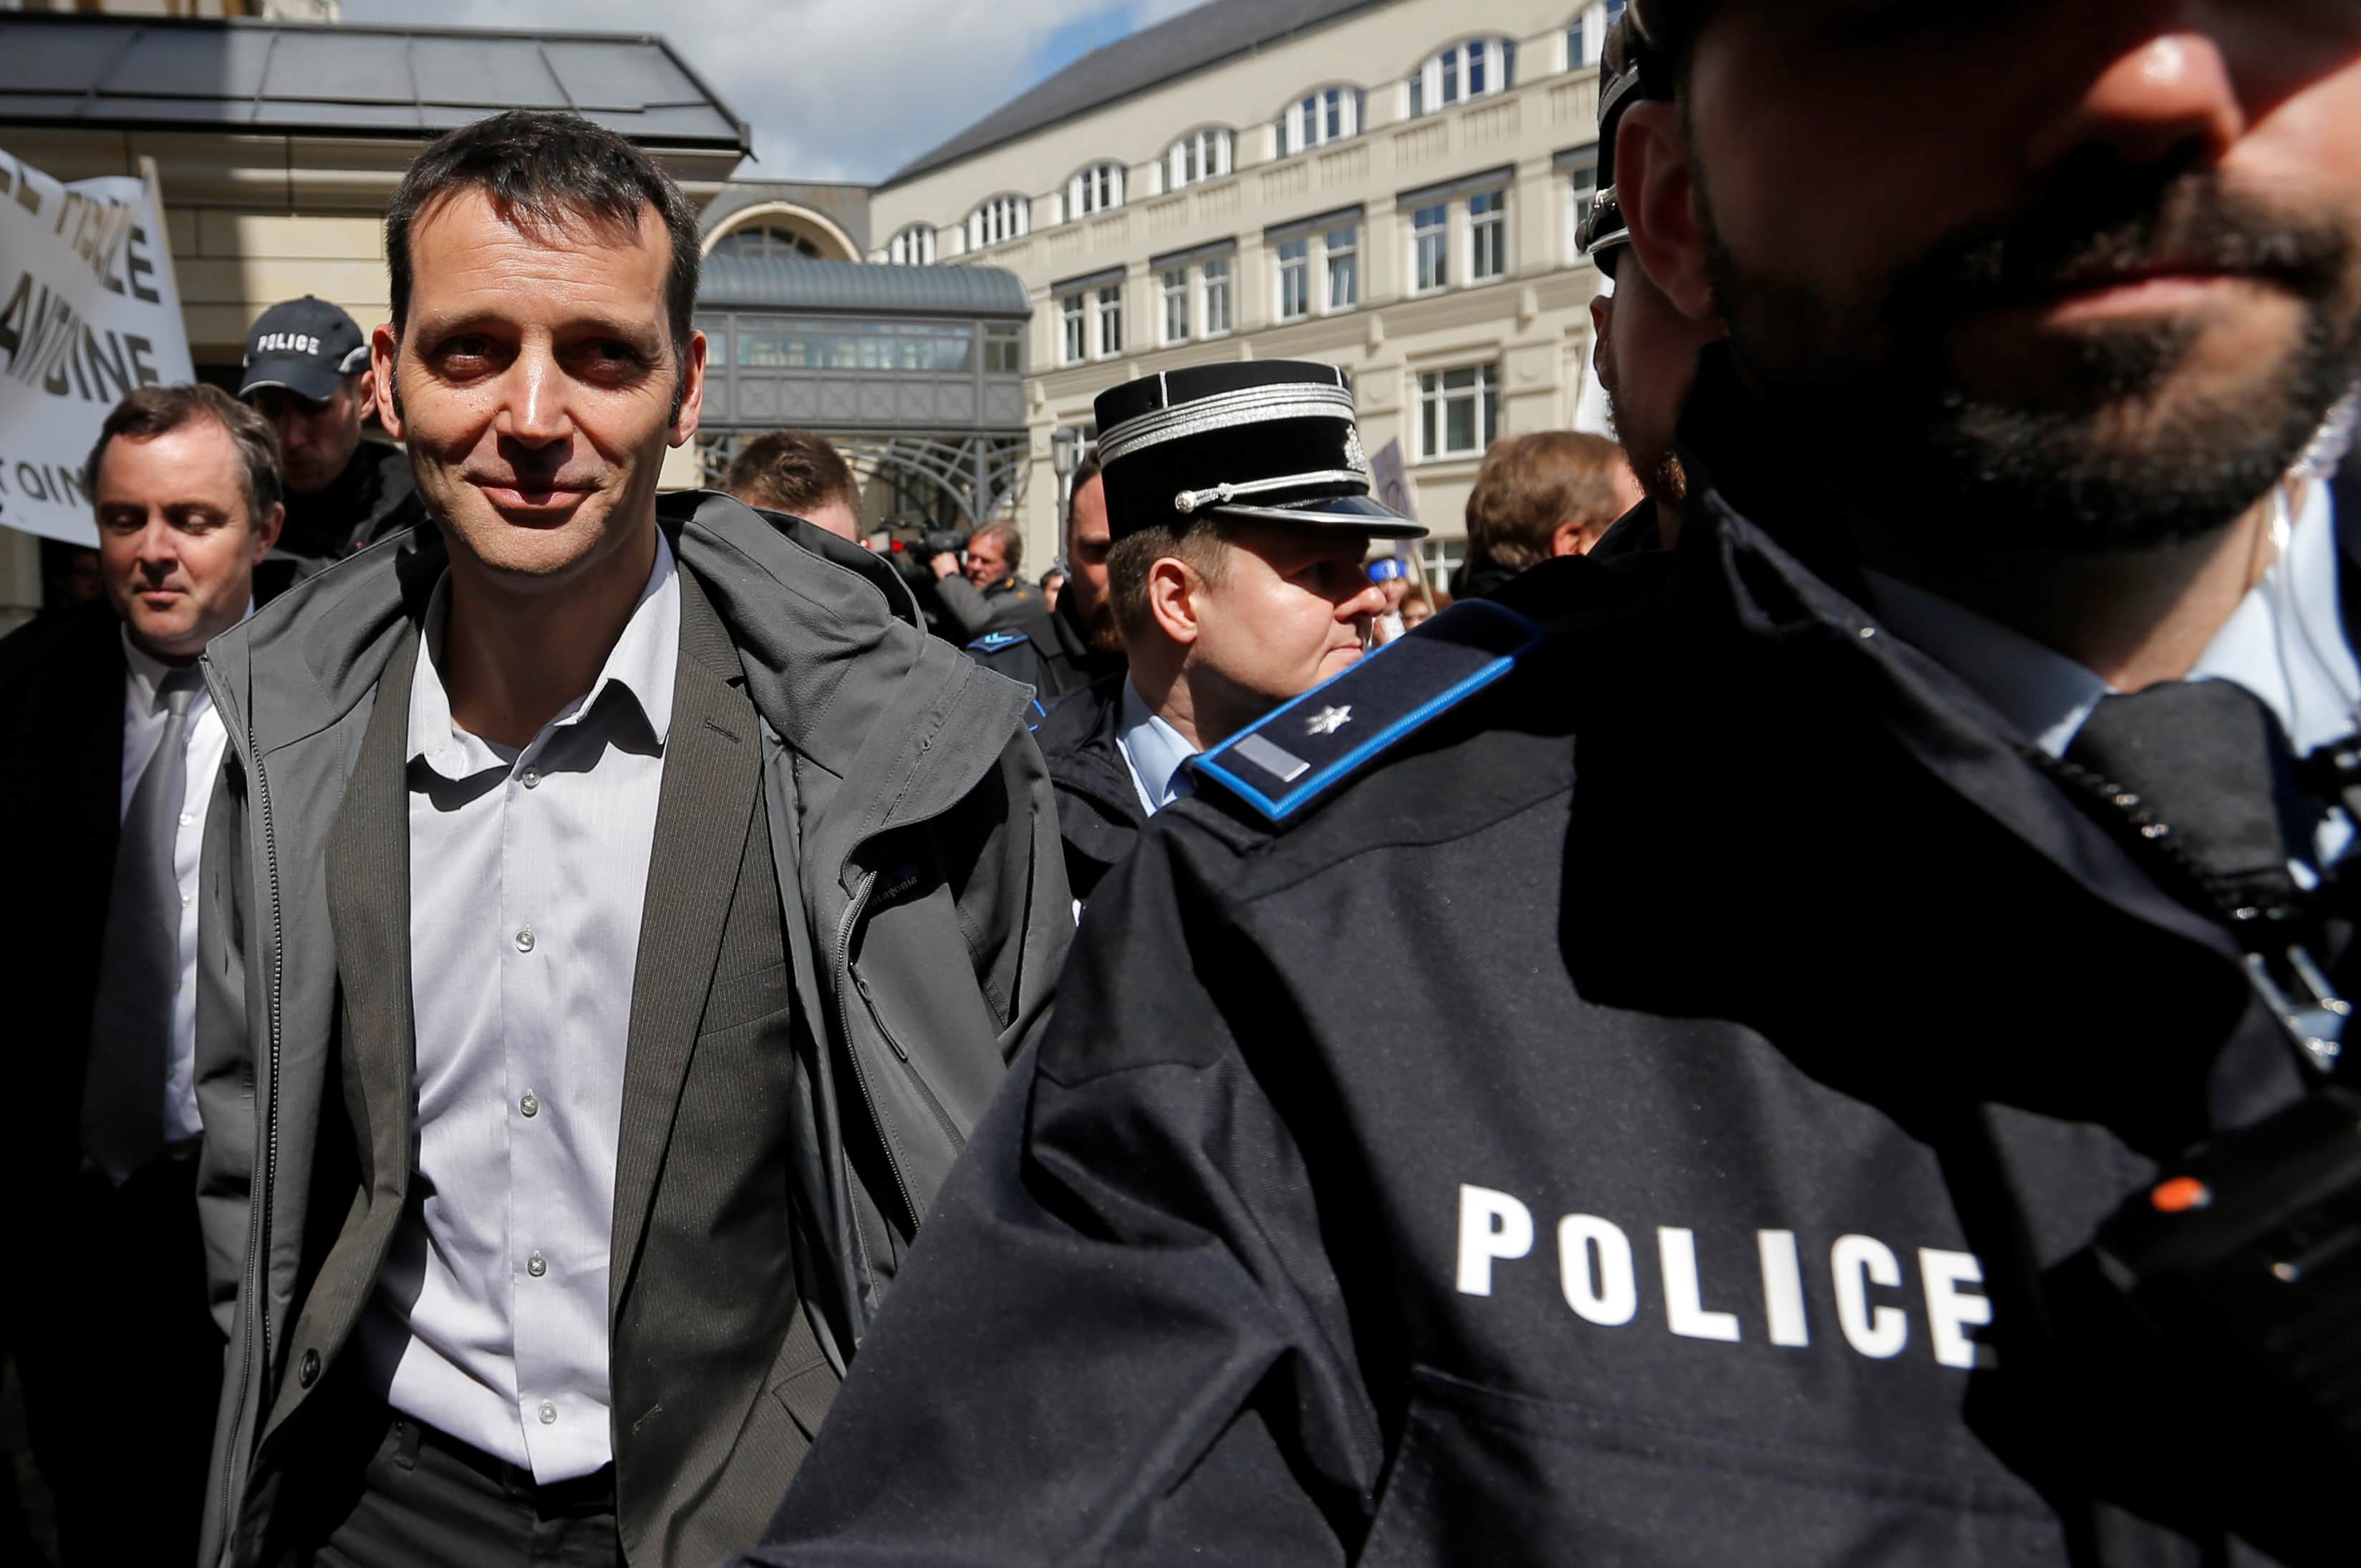 French journalist Edouard Perrin (L) is escorted by police as he leaves the court after the first day of the LuxLeaks trial in Luxembourg, 26 April 2016, REUTERS/Vincent Kessler